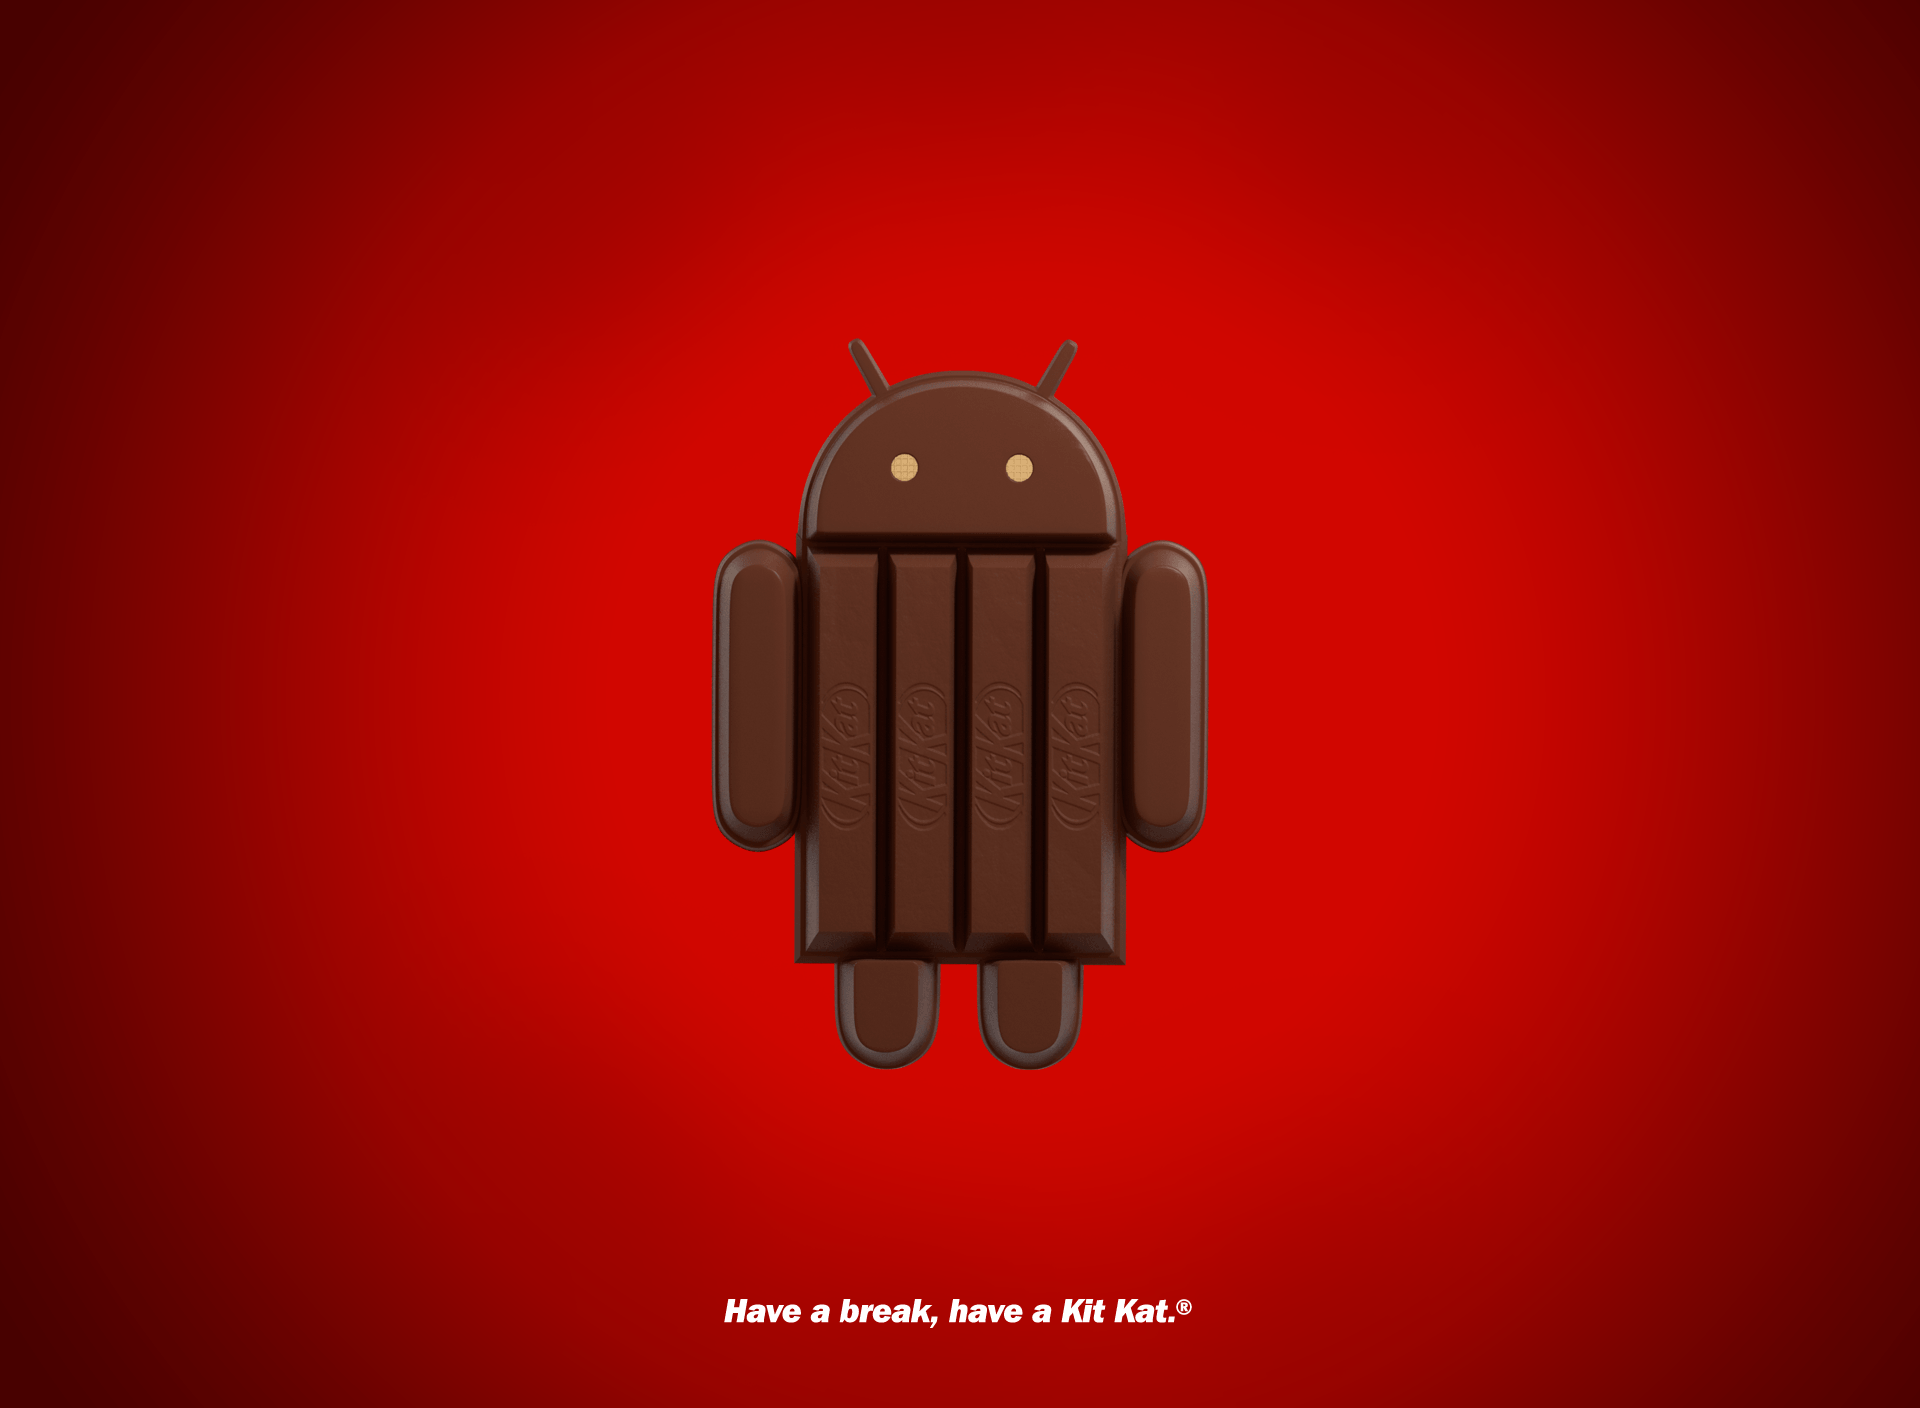 Android Kit Kat Wallpaper #Android #kitkat #nestle .4. Android